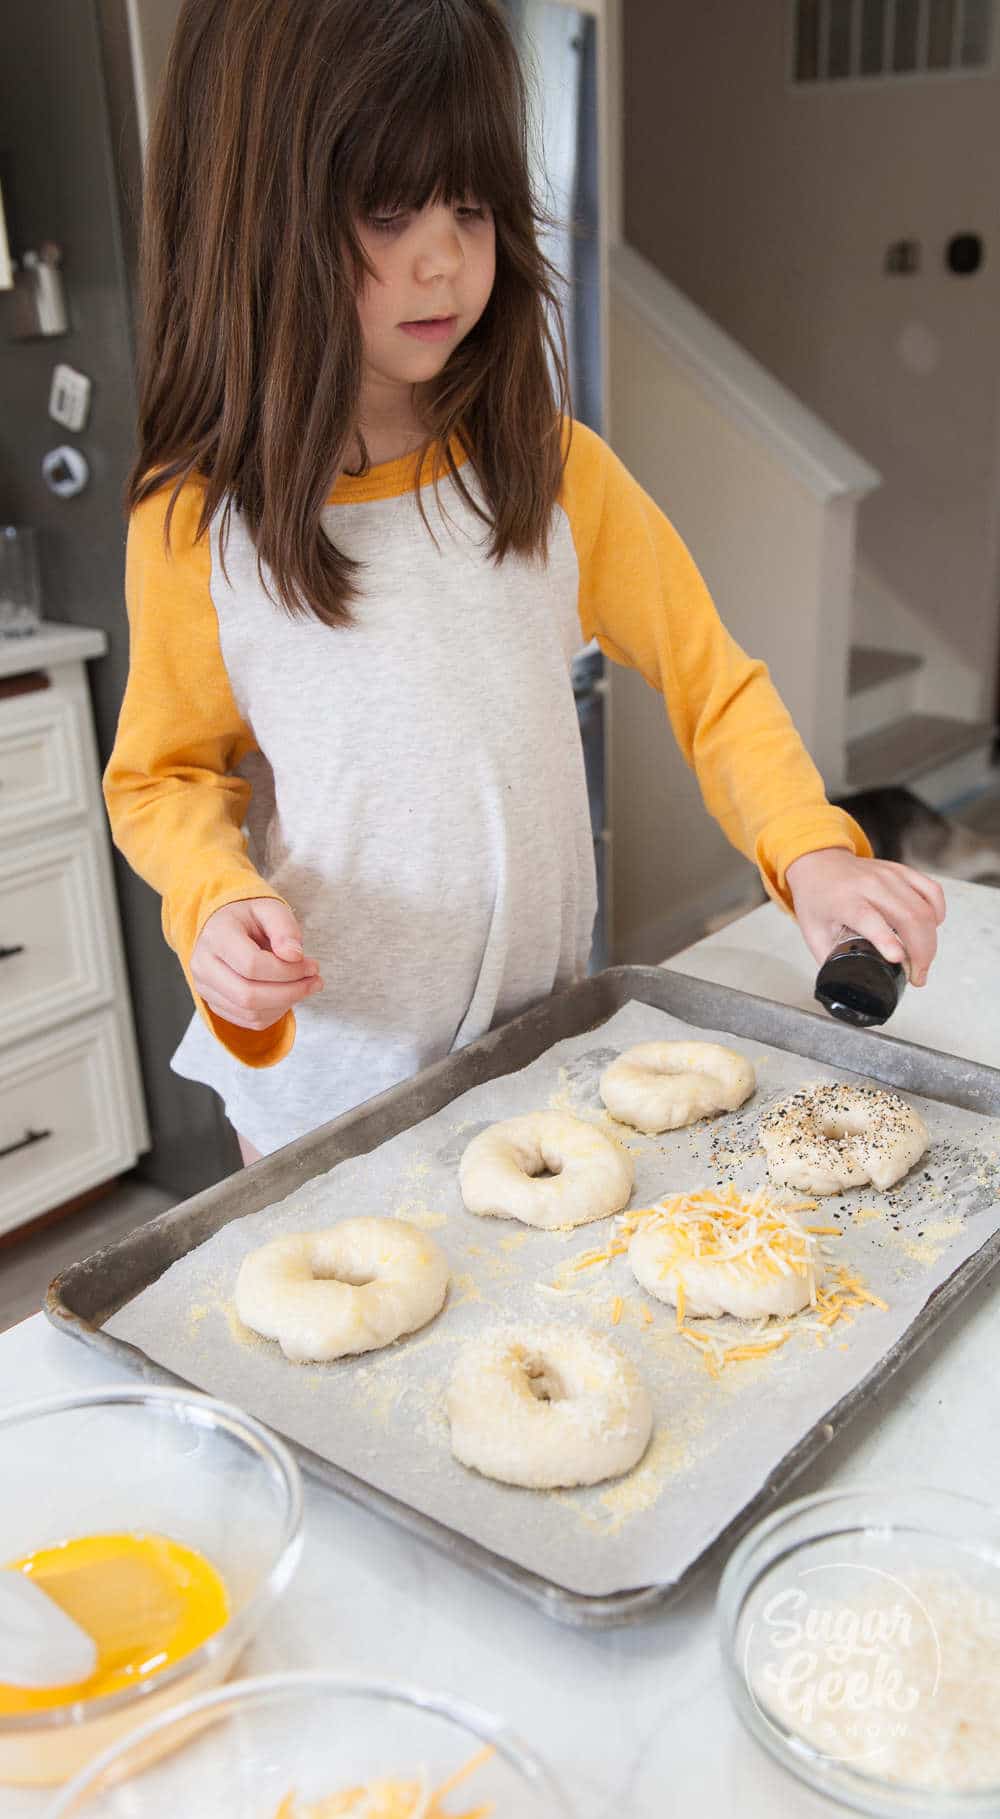 little girl with shoulder-length brown hair and yellow and white shirt sprinkling toppings onto bagels on a sheet pan